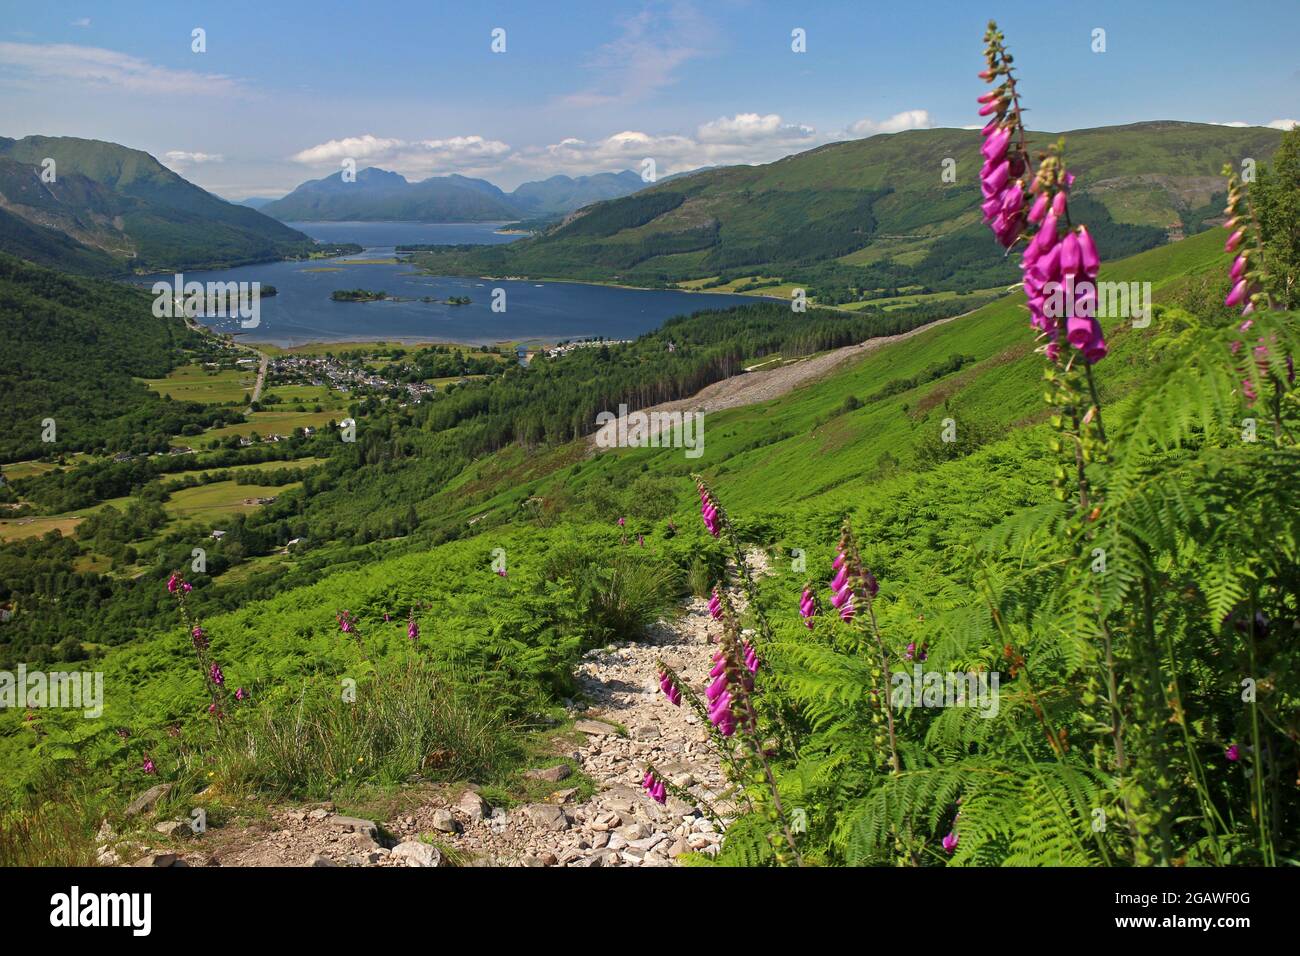 Views of Glencoe village and Loch Leven from path up the Pap of Glencoe, Scotland Stock Photo